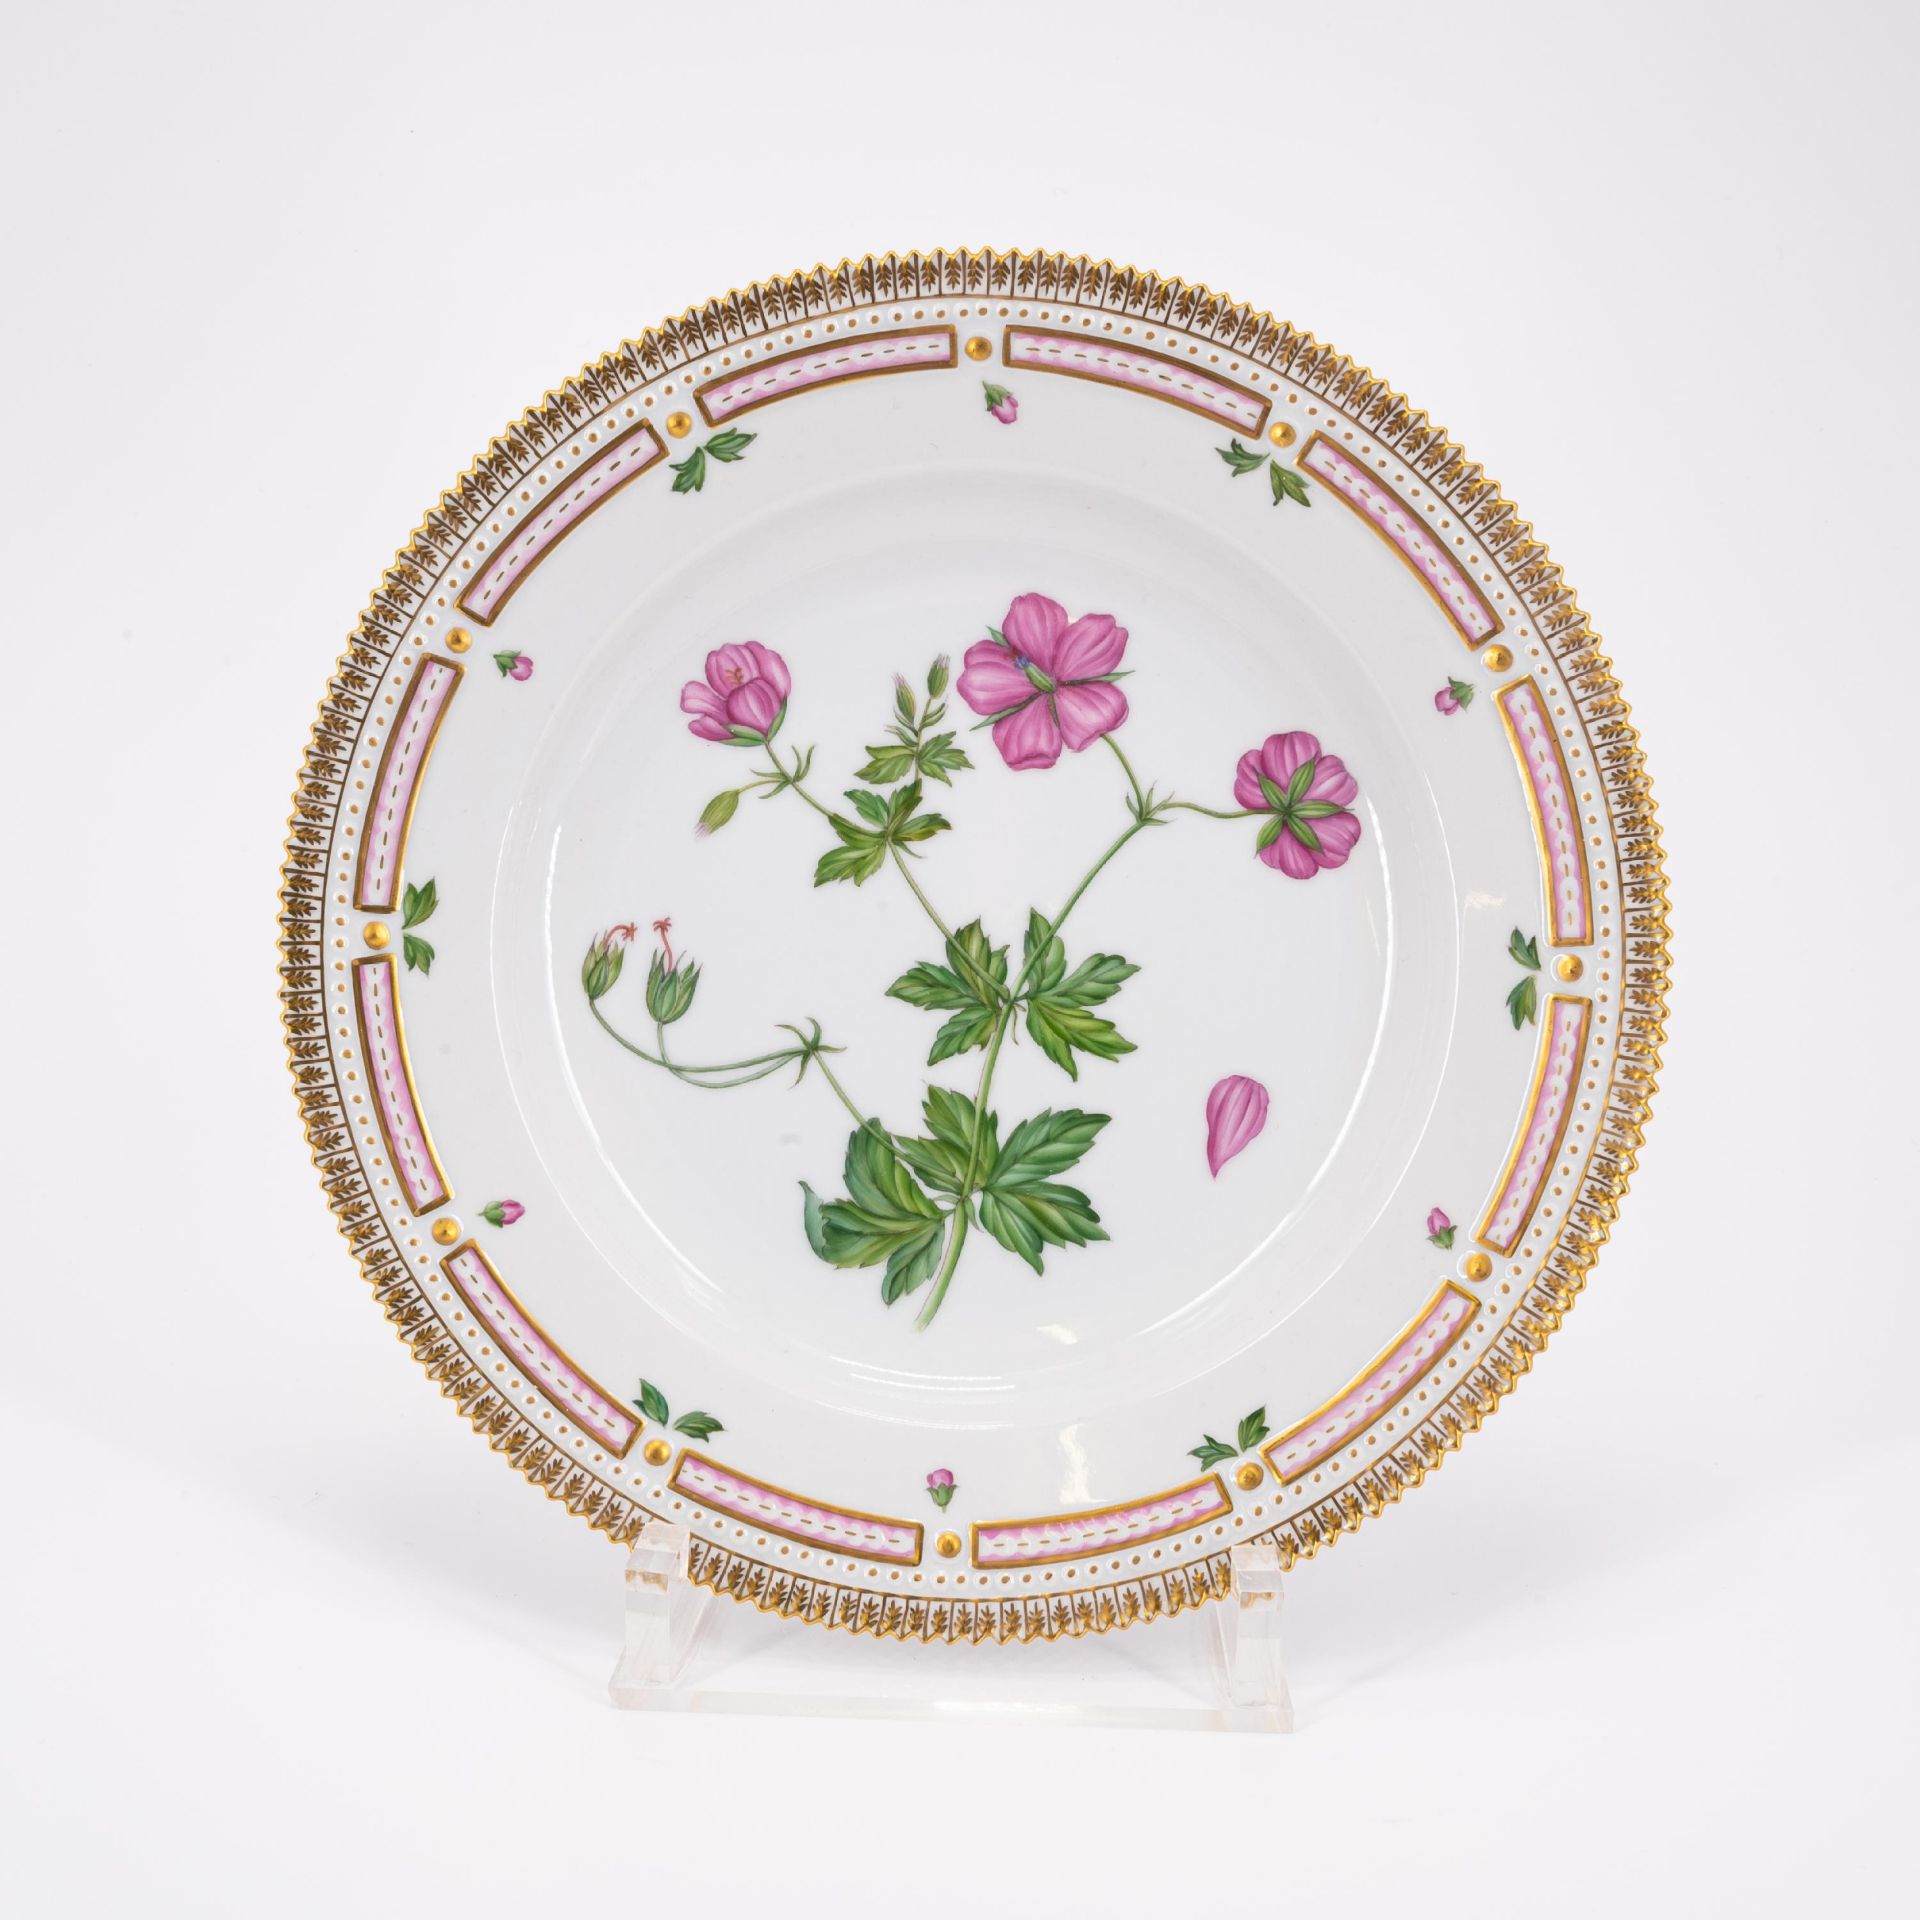 Royal Copenhagen: 95 PIECES FROM A 'FLORA DANICA' DINING SERVICE - Image 18 of 26